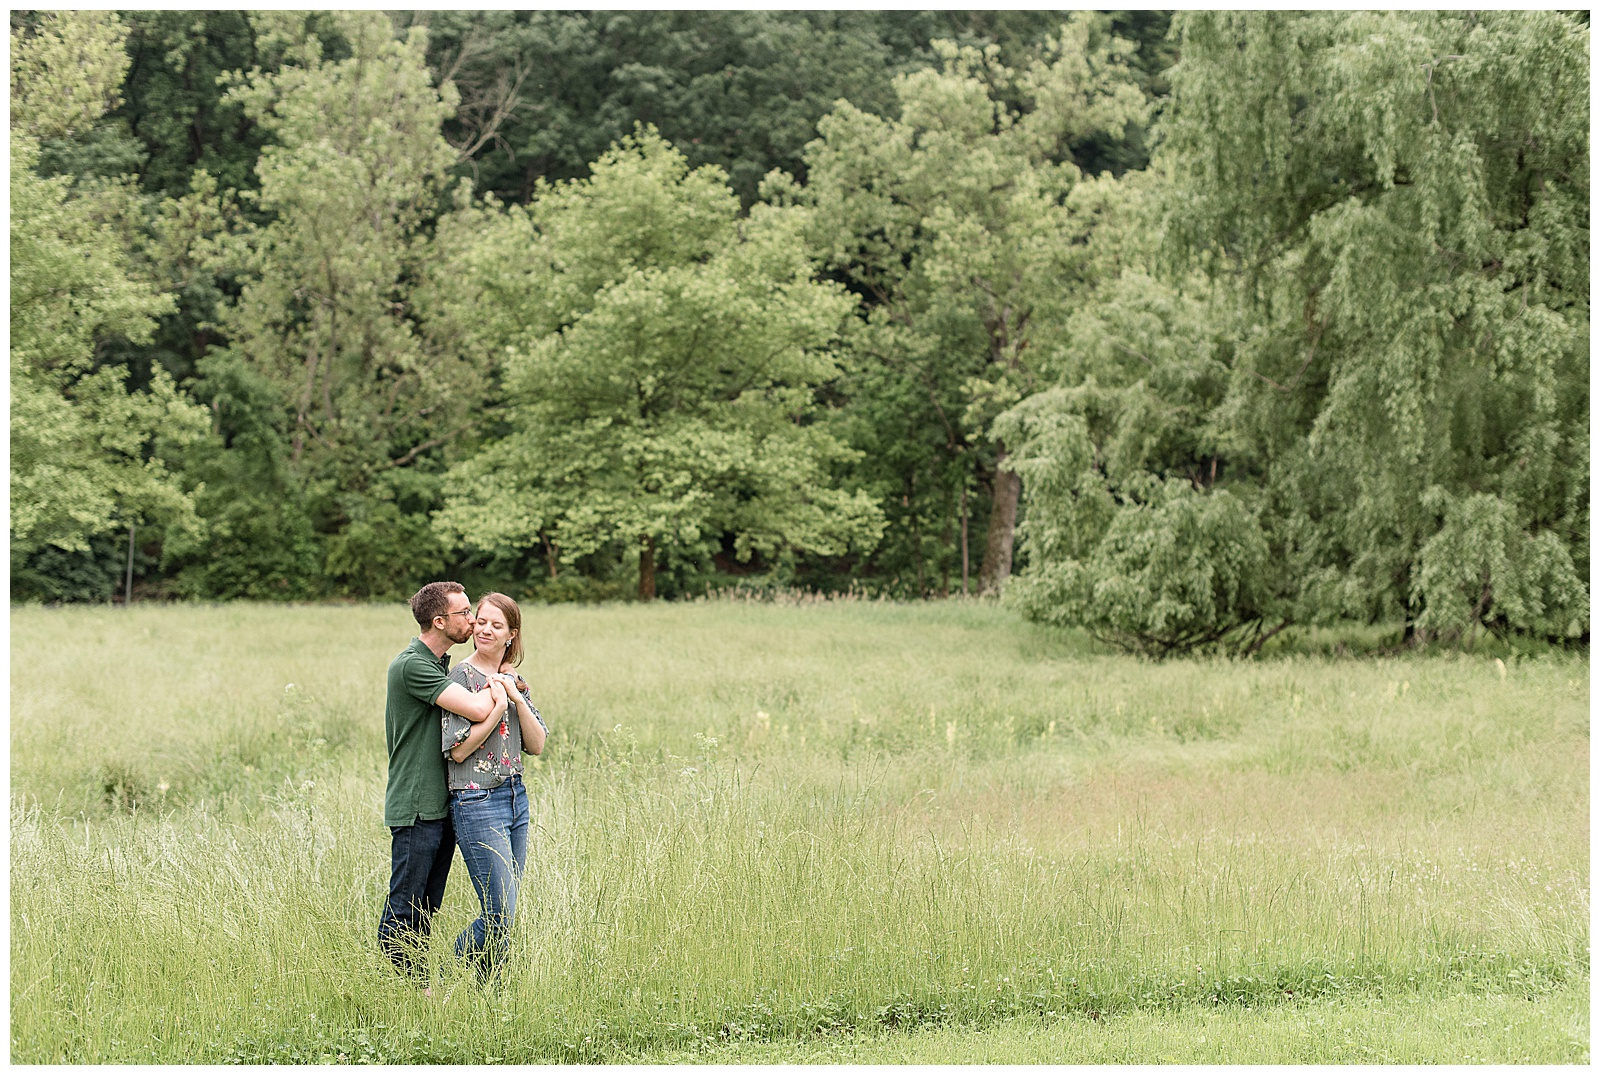 guy hugging and kissing girl at edge of grassy field at private residence in mechanicsburg, pennsylvania